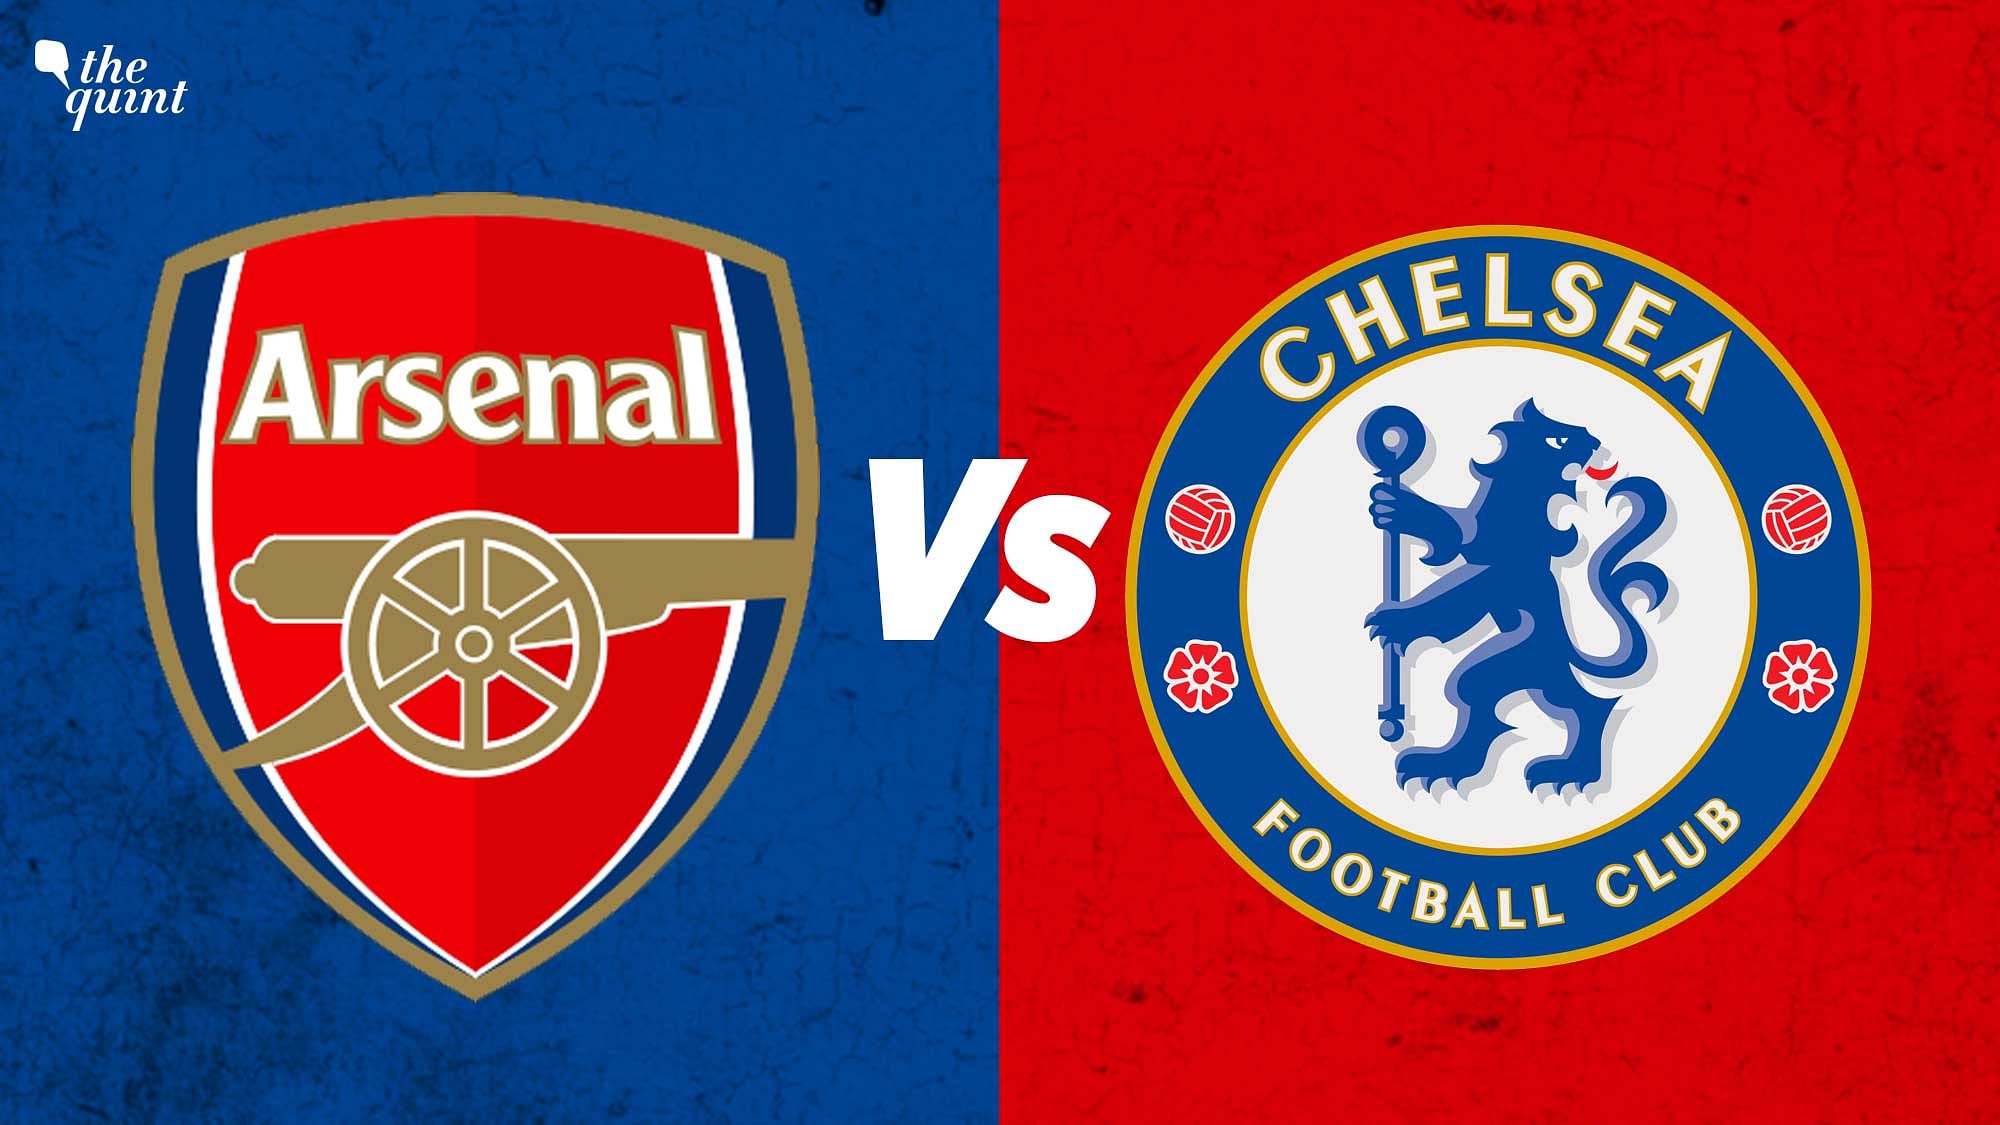 Arsenal vs Chelsea Live Streaming When, Where and How To Watch ARS vs CHE English Premier League Live Telecast On TV, Online and App